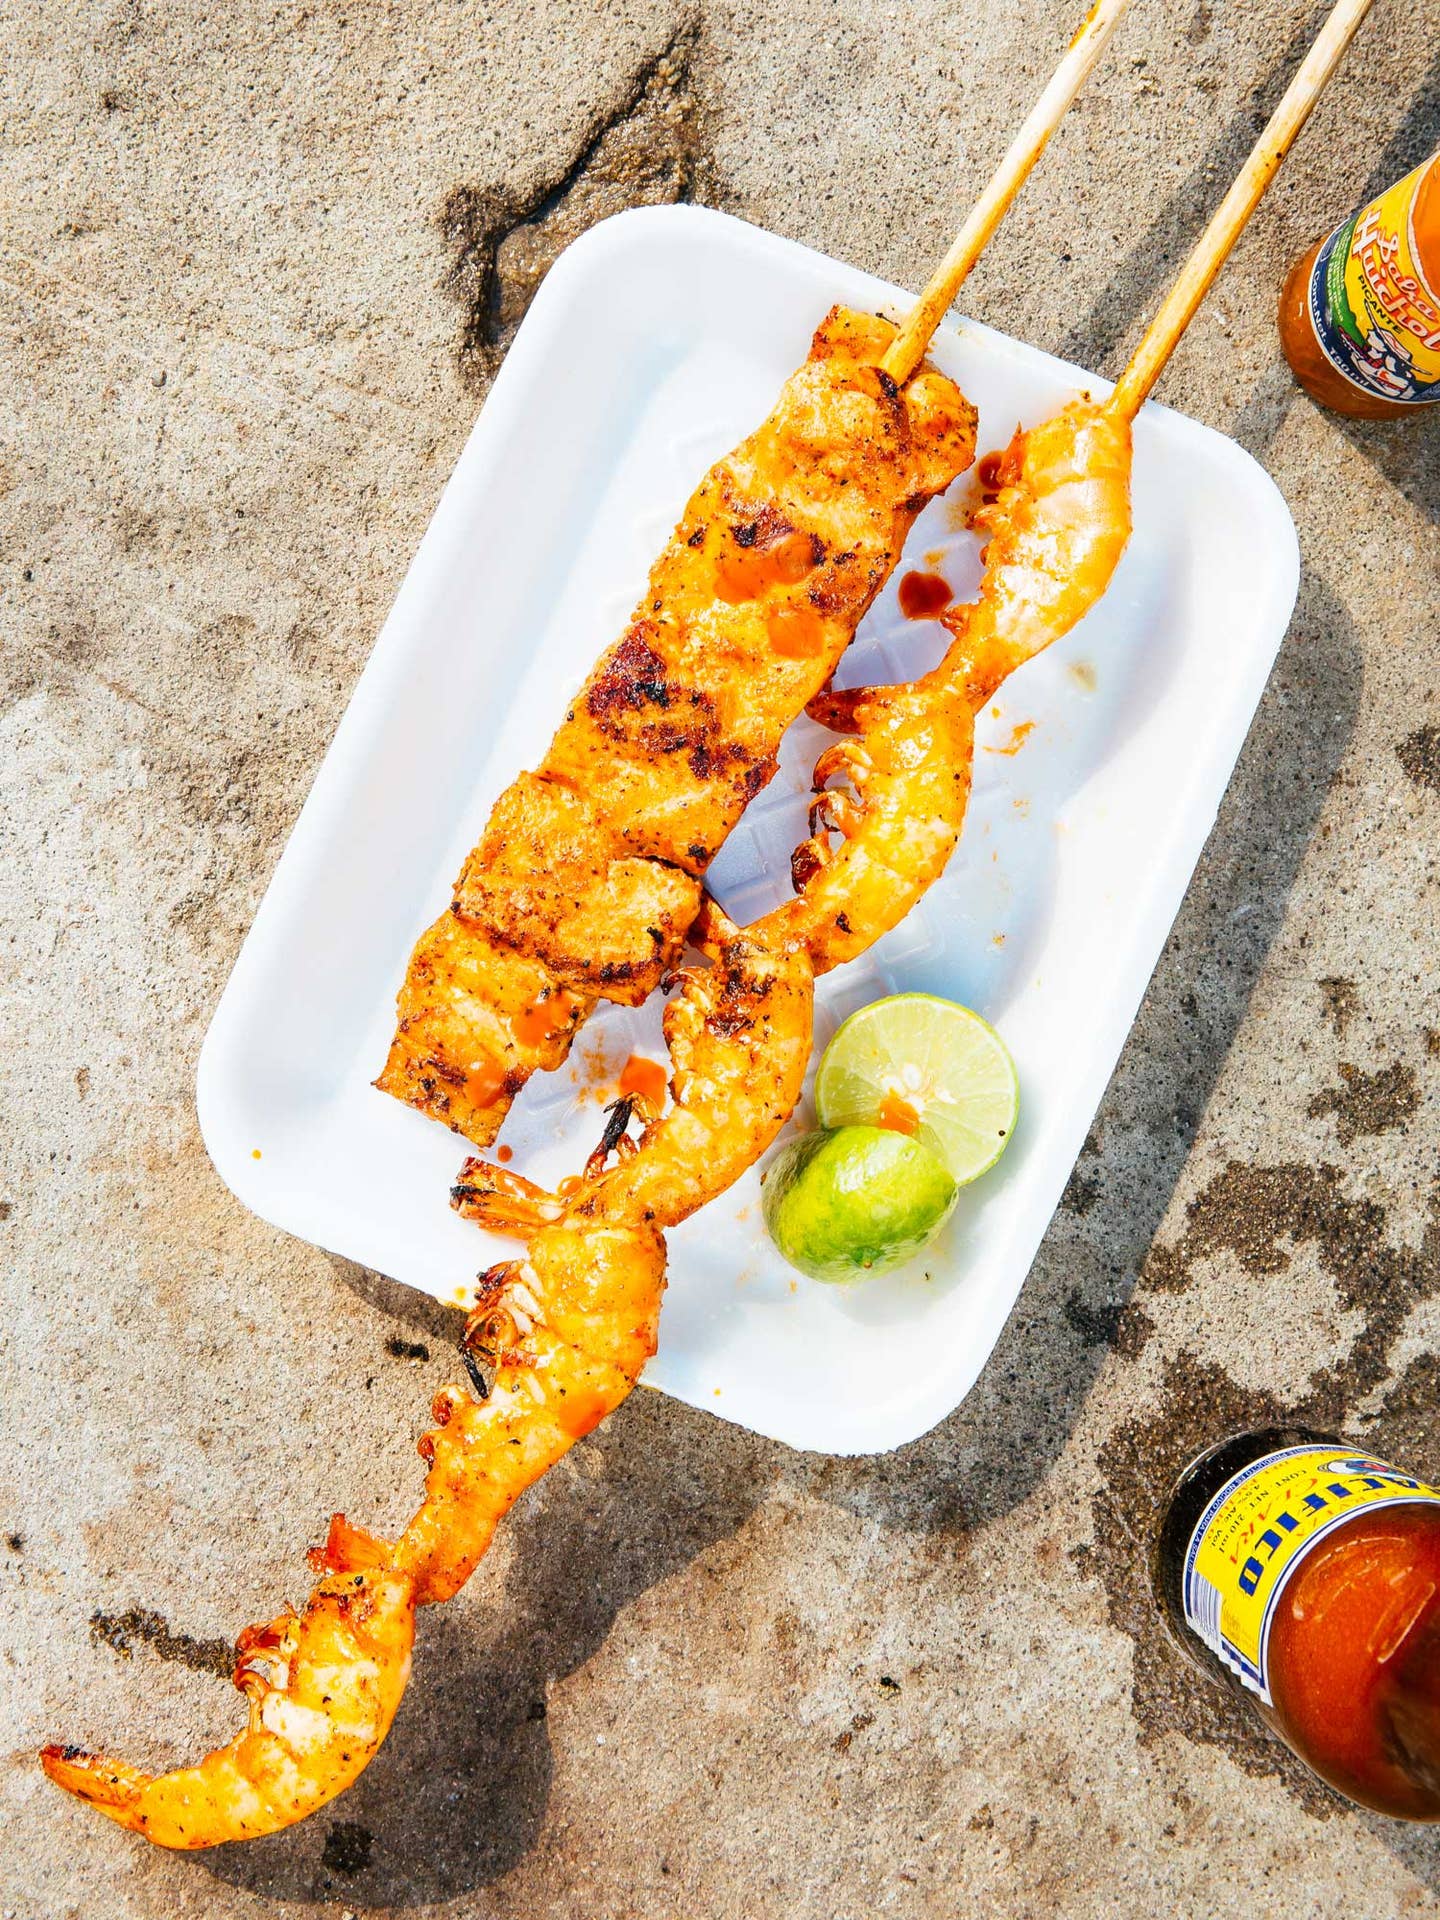 This Fish on a Stick Might Be the Best Beach Snack in Mexico